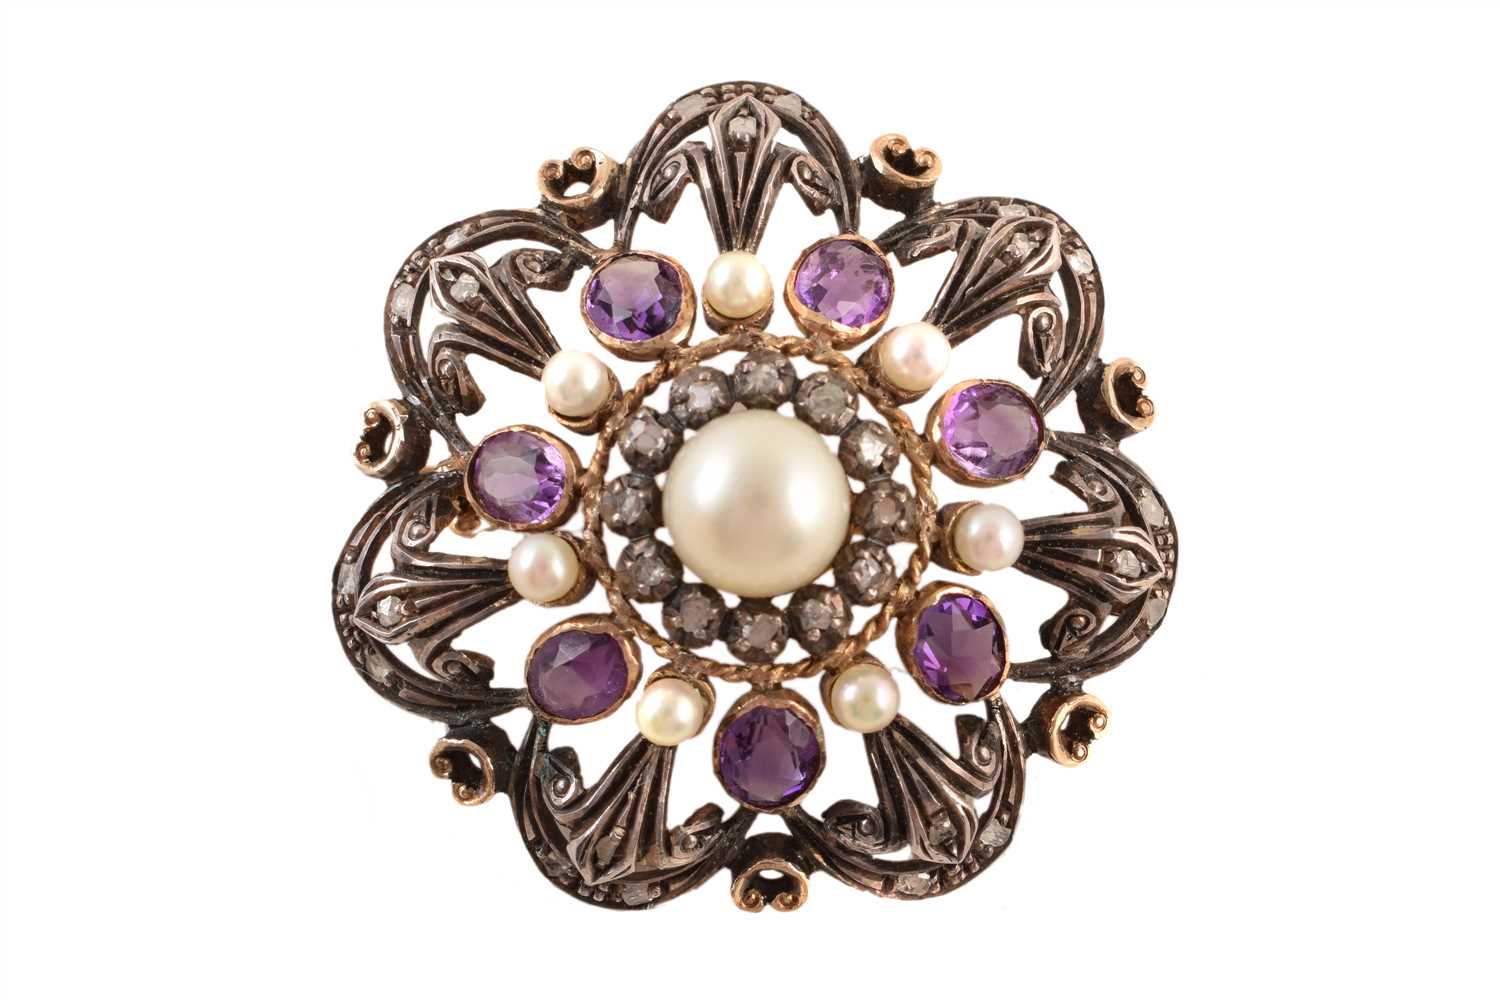 Lot 37 - An early 20th century cultured pearl, amethyst and diamond brooch